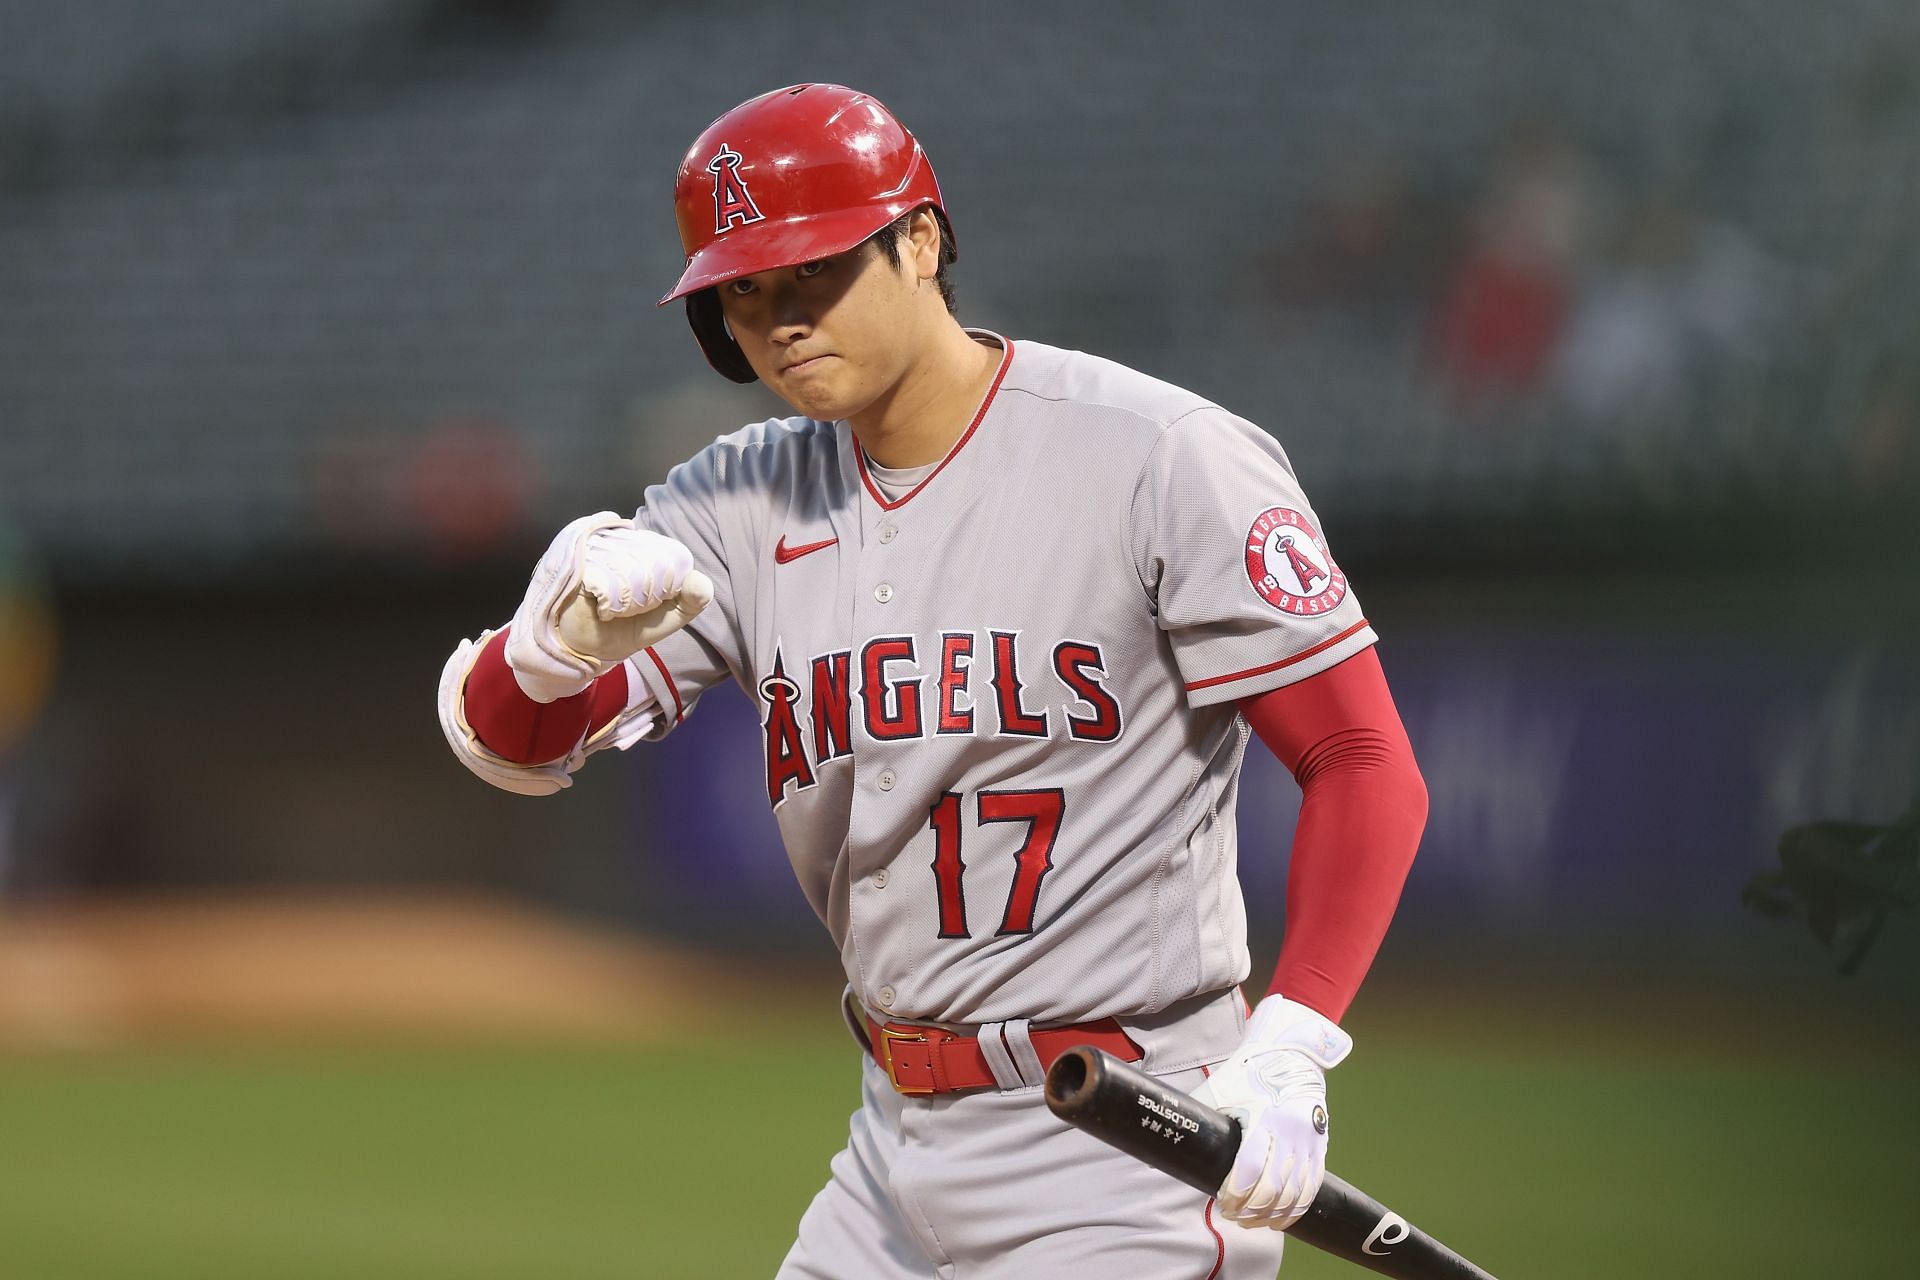 “As with the Mets, a trade to the Yanks seems highly unlikely” – MLB reporter suggests neither the Yankees nor Mets will spring for a Shohei Ohtani rental this year